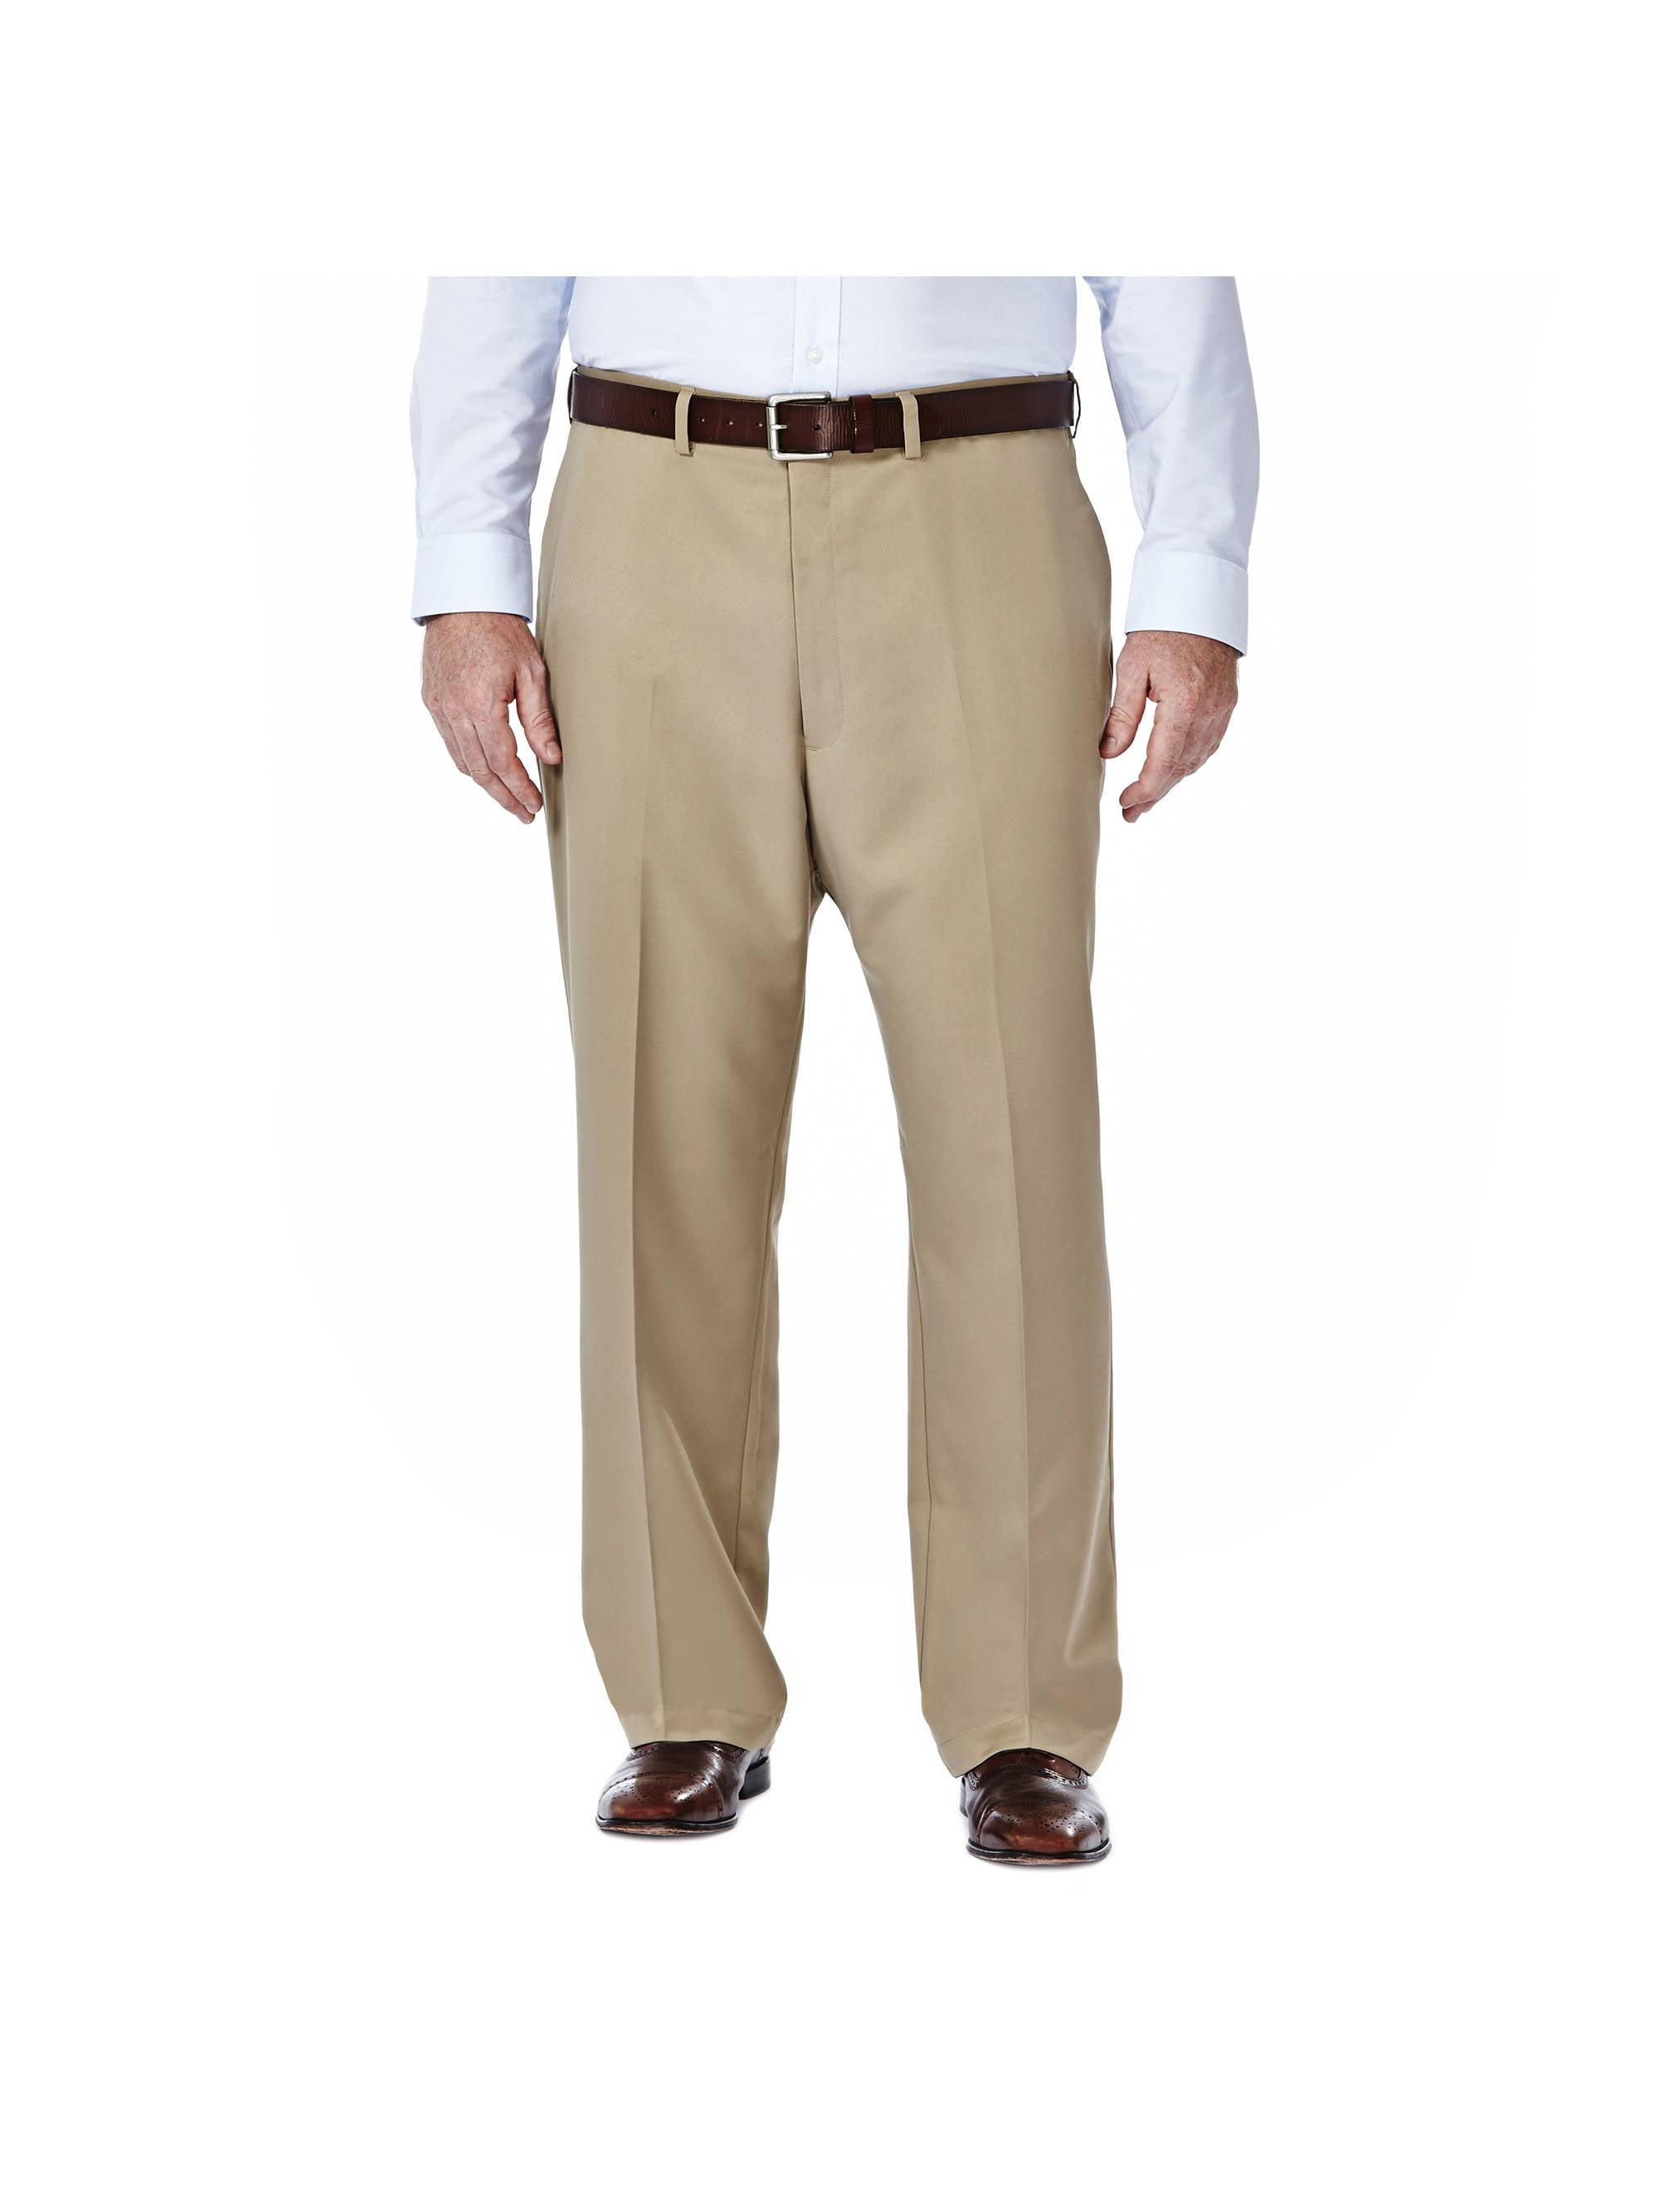 NWT MENS HAGGAR CLASSIC FIT WORK TO WEEKEND FLAT PANTS $60 STRING 41114957522 